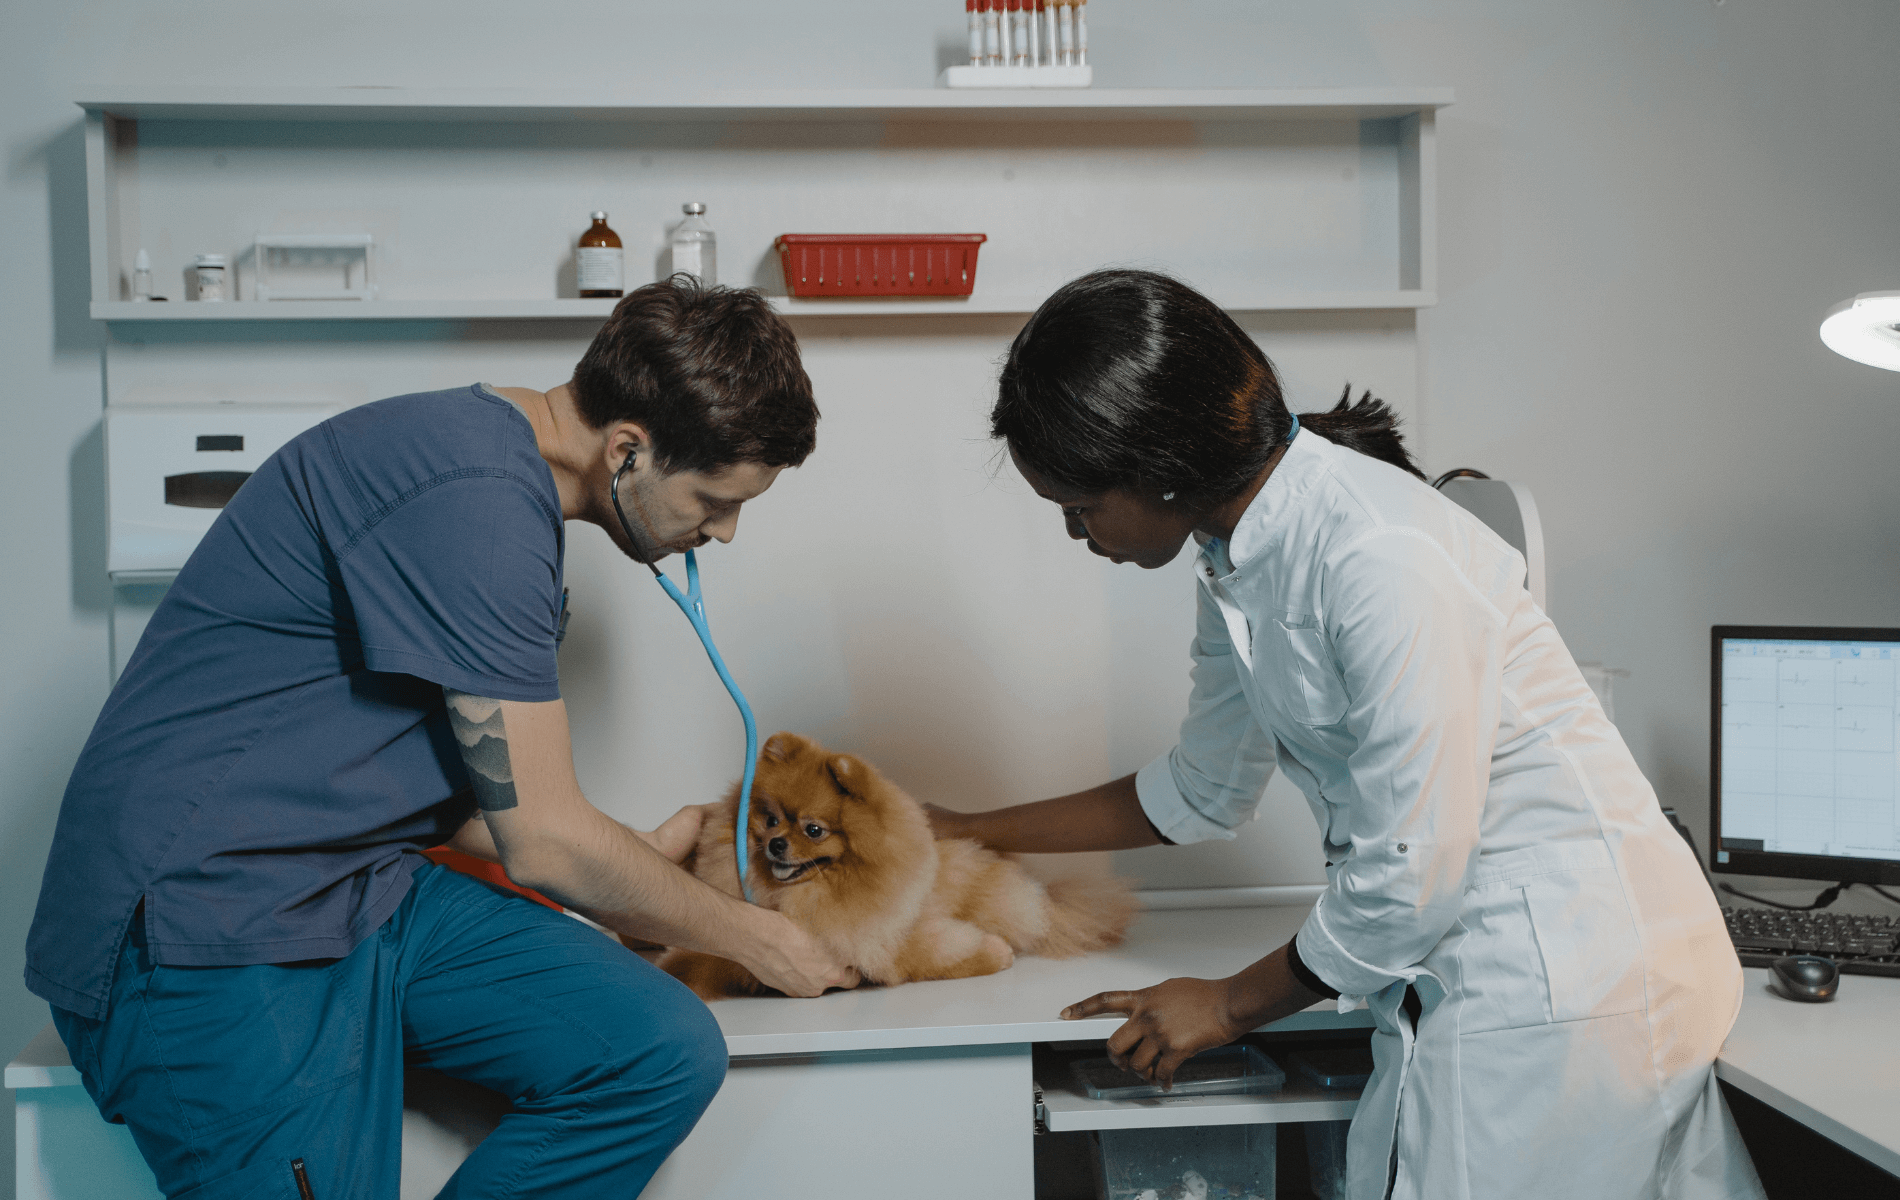 A person and person examining a dog<br />
